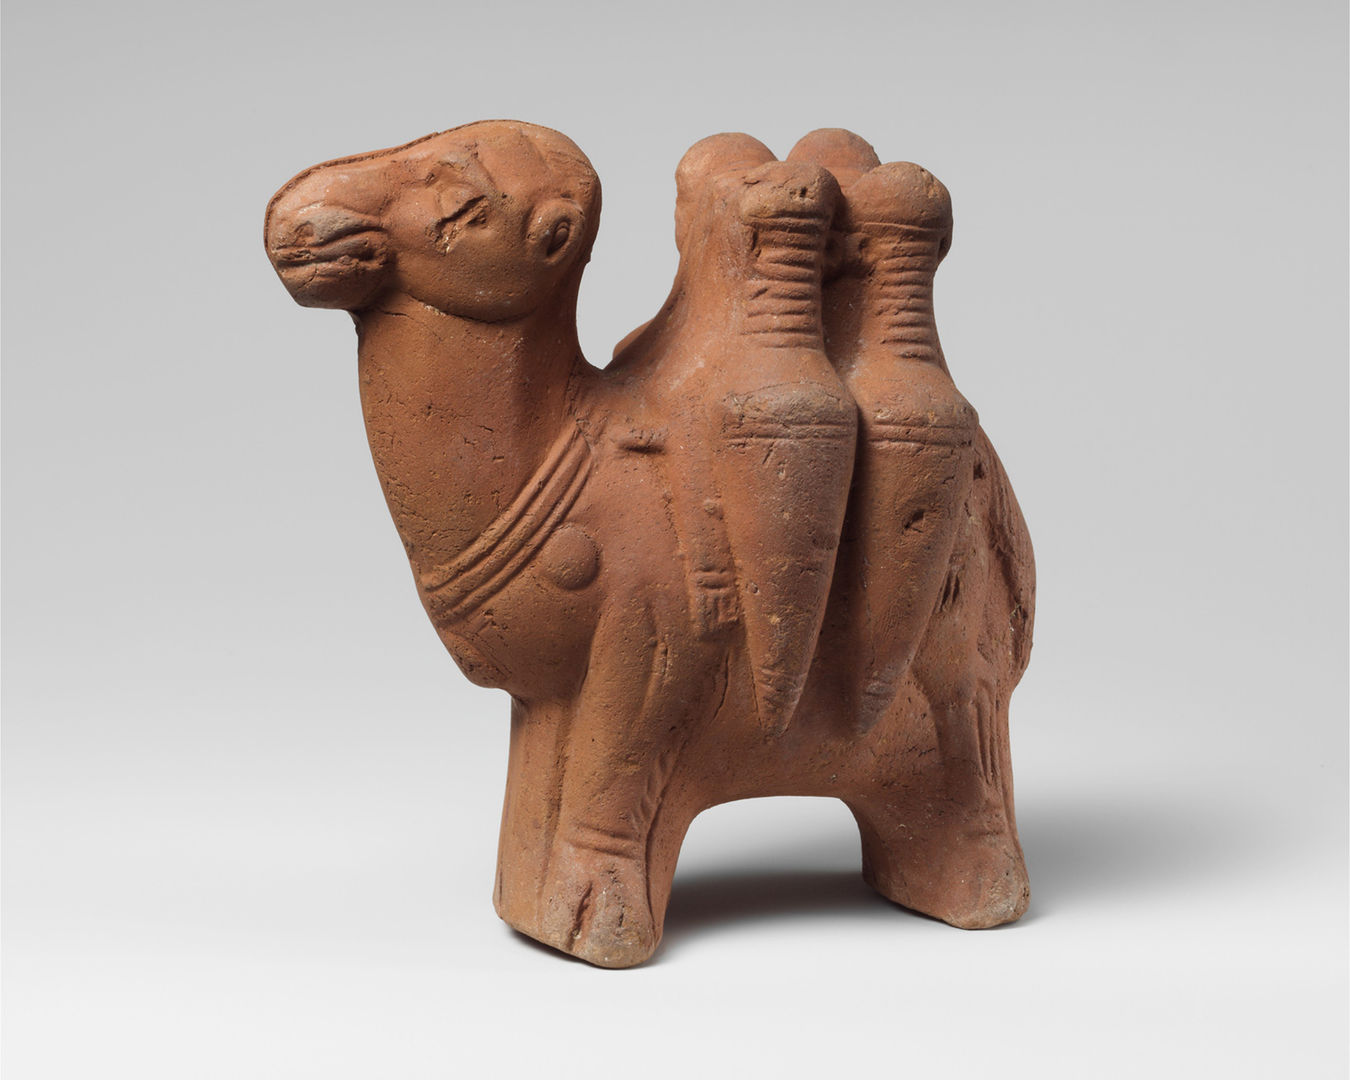 Figurine of a camel carrying transport amphorae